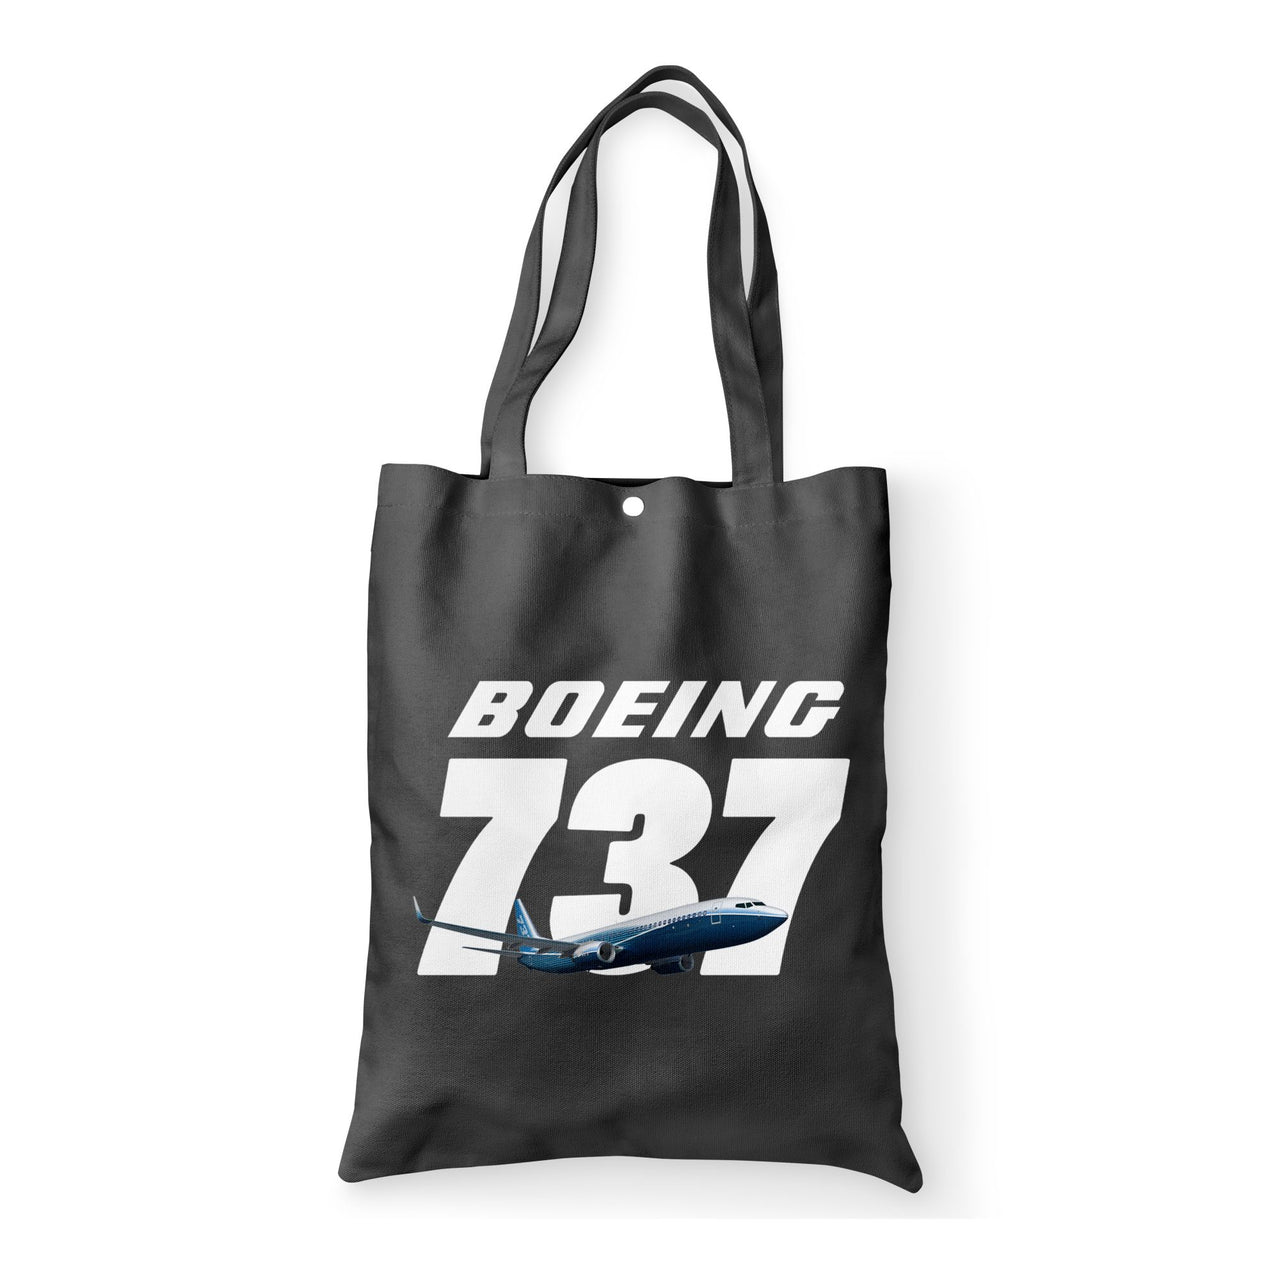 Super Boeing 737+Text Designed Tote Bags